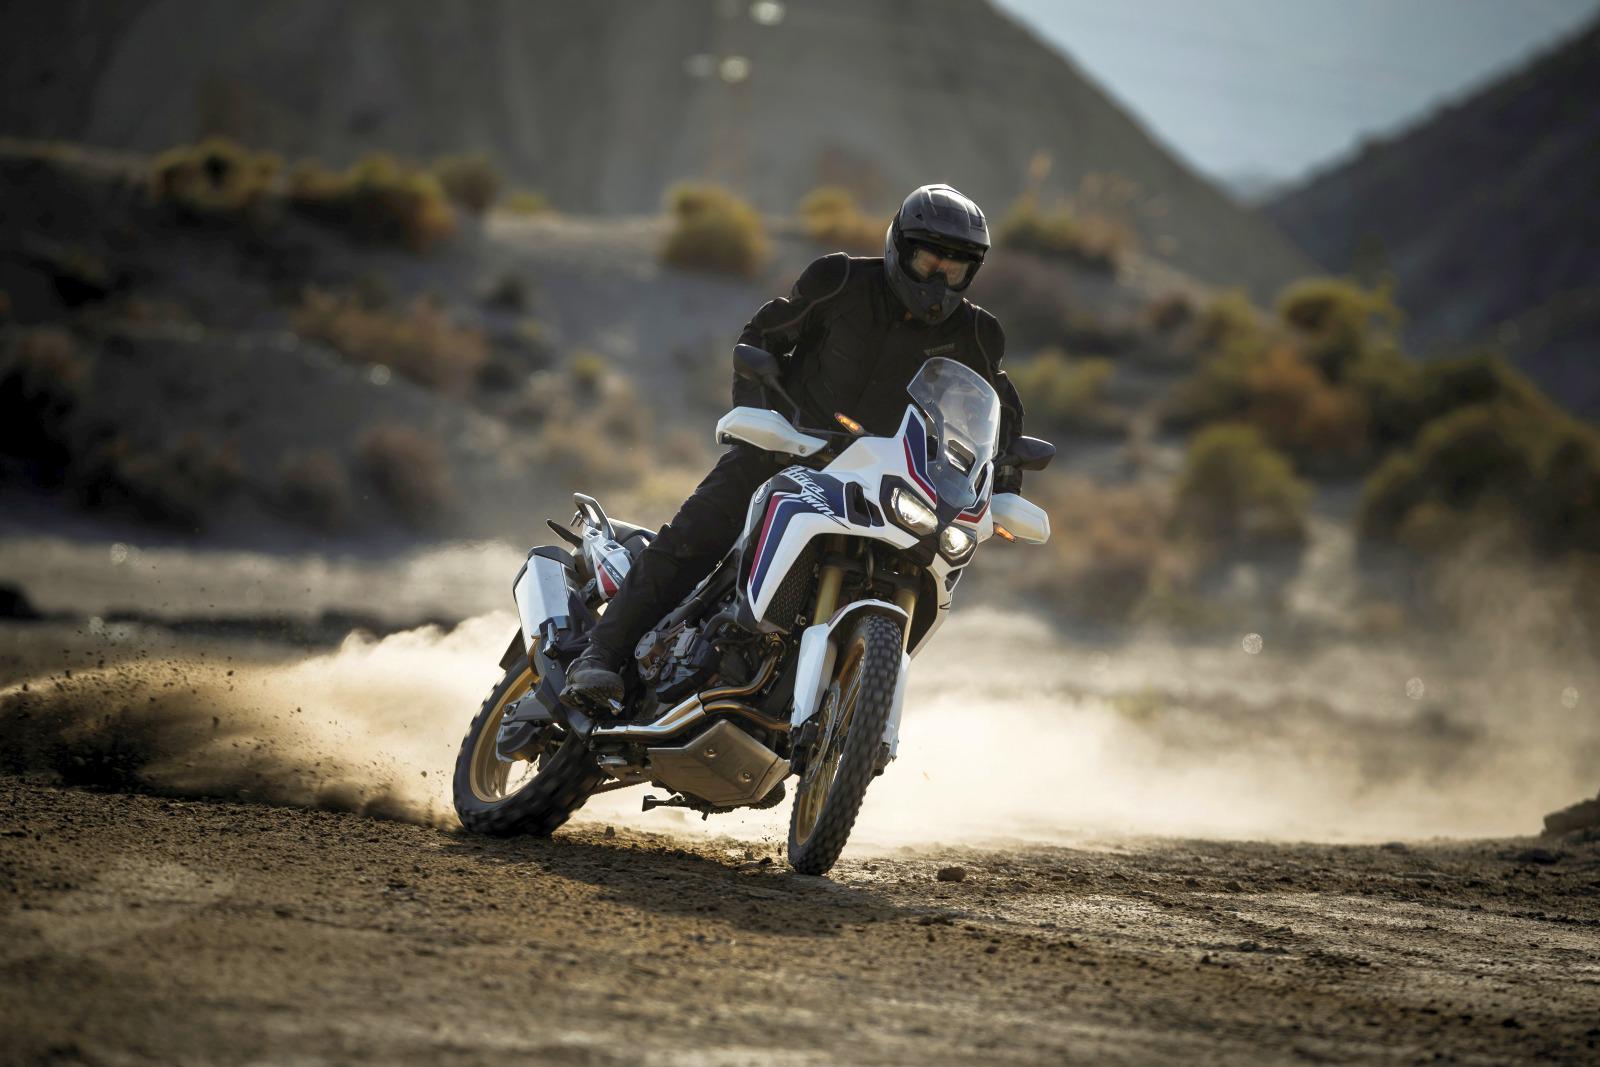 Honda Africa Twin CRF1000L Picture Motorcycles / Photo Gallery